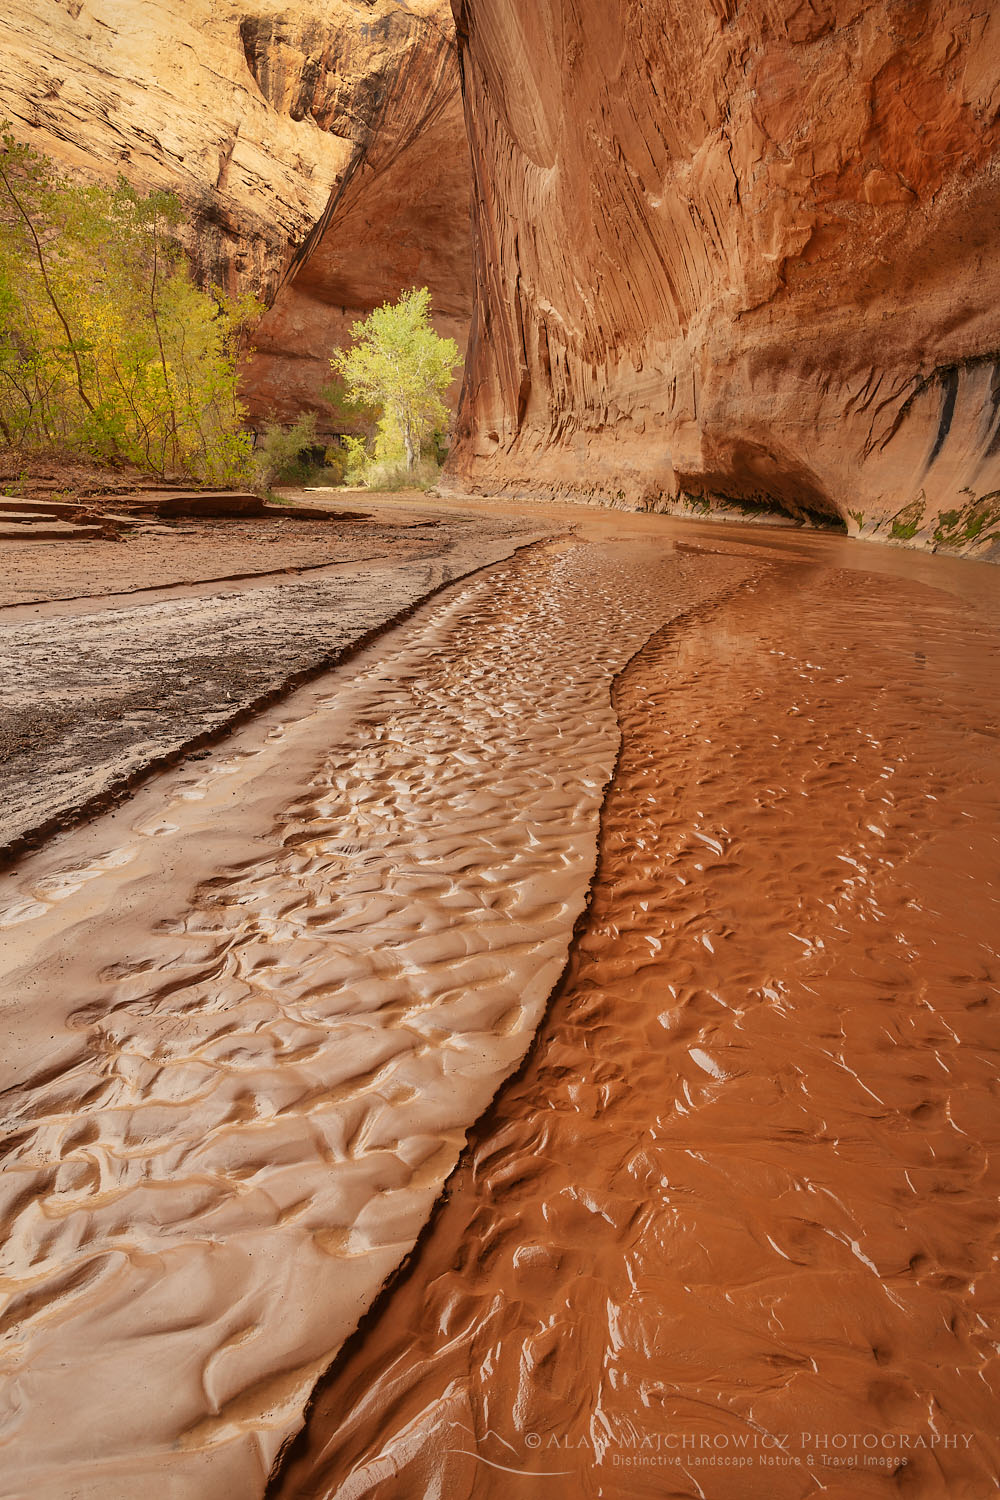 Sand and mud patterns in stream, Coyote Gulch Glen Canyon National Recreation Area Utah #75985